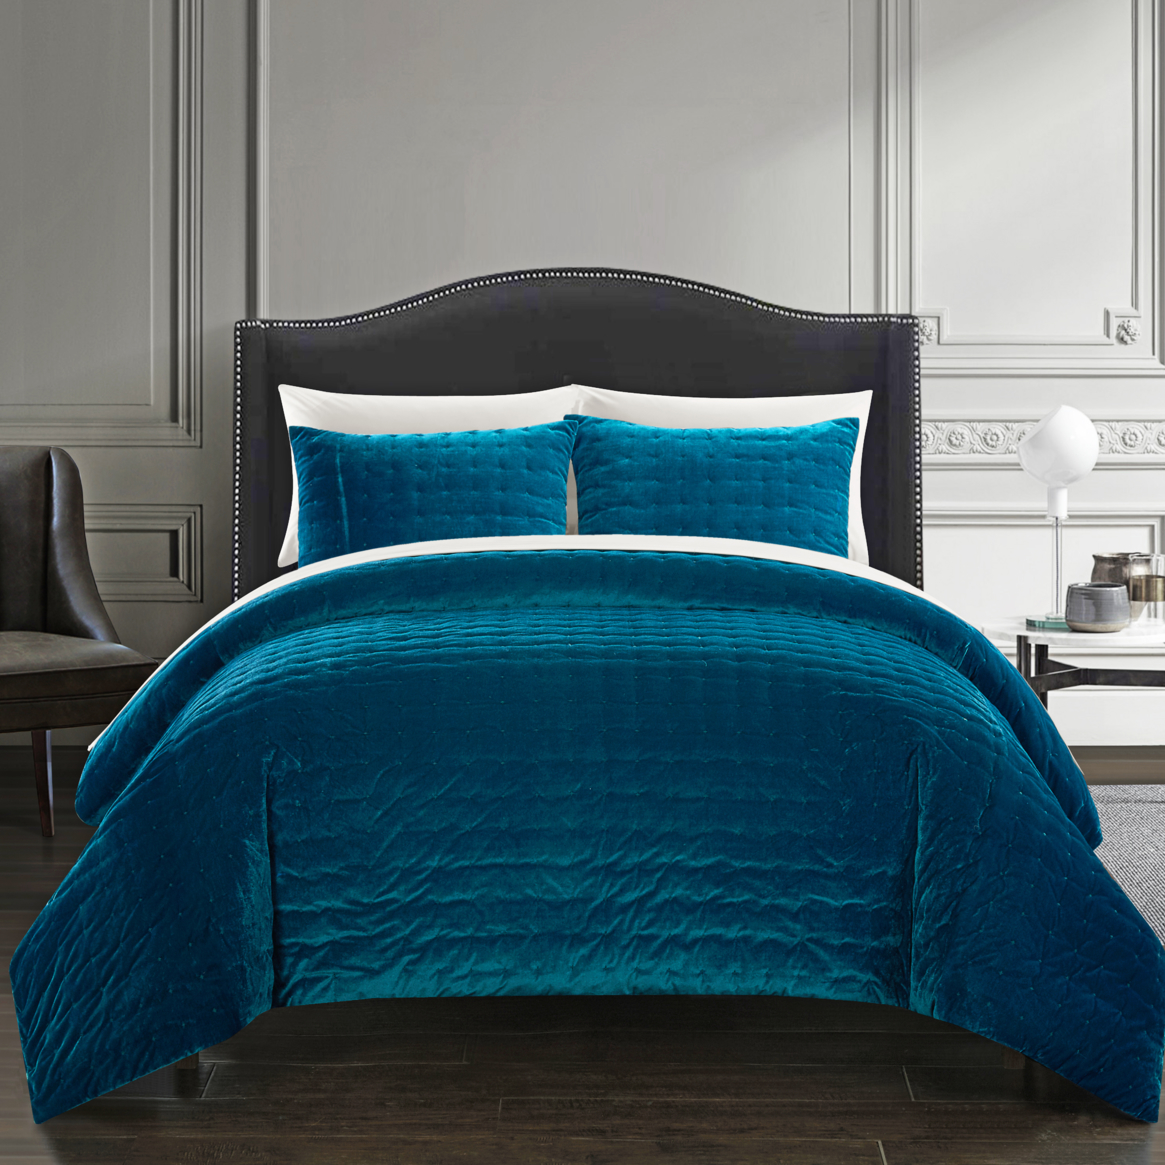 Chaya 7 Piece Comforter Set Luxurious Hand Stitched Velvet Bed In A Bag Bedding - Teal, Queen